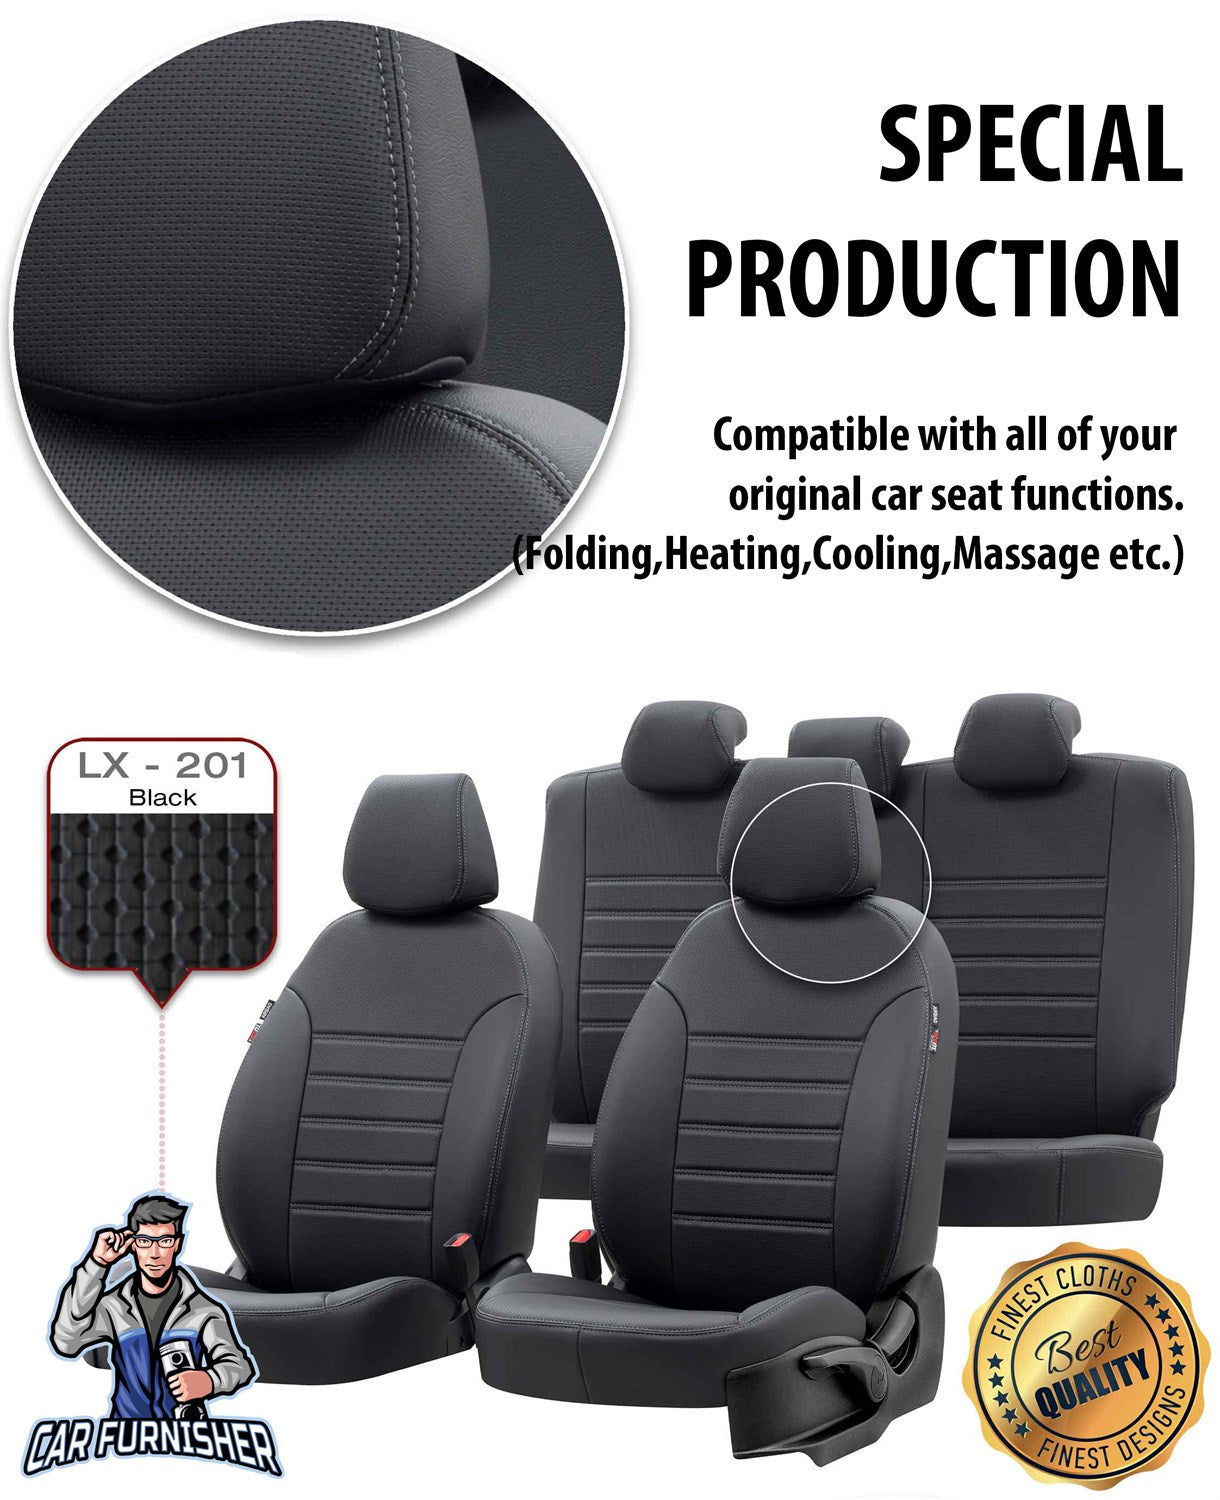 Opel Frontera Seat Cover New York Leather Design Black Leather